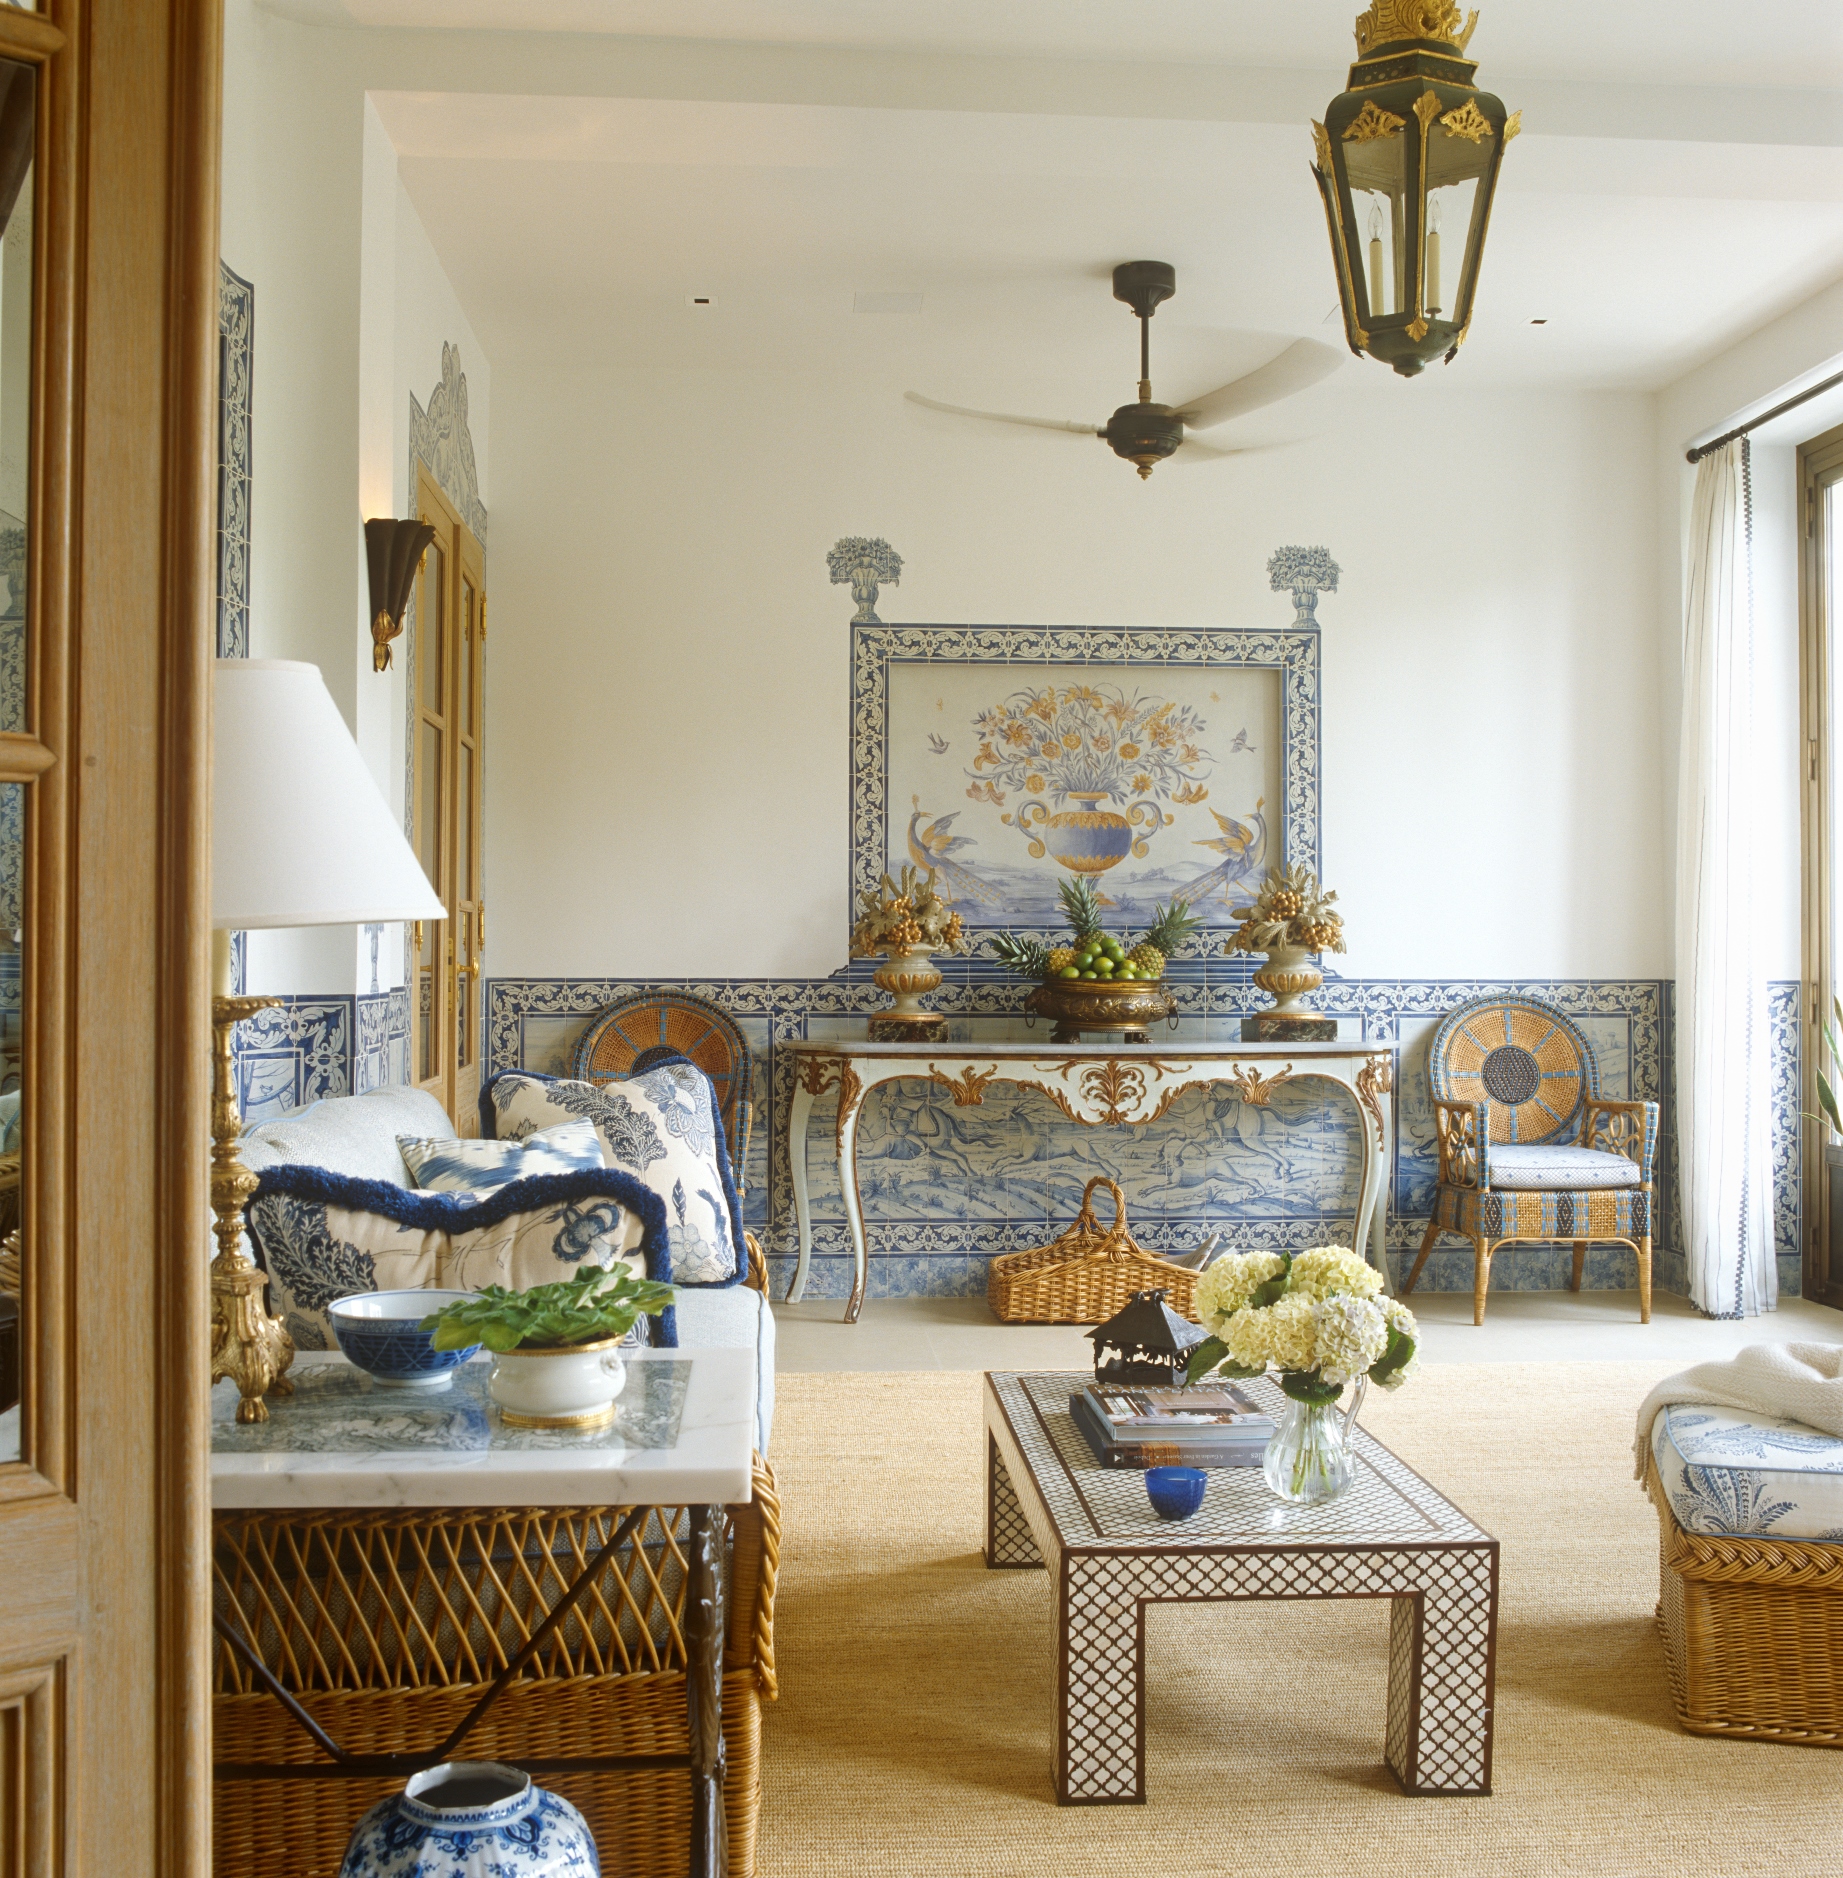 Antiques-Filled Home by Brian J. McCarthy | InCollect